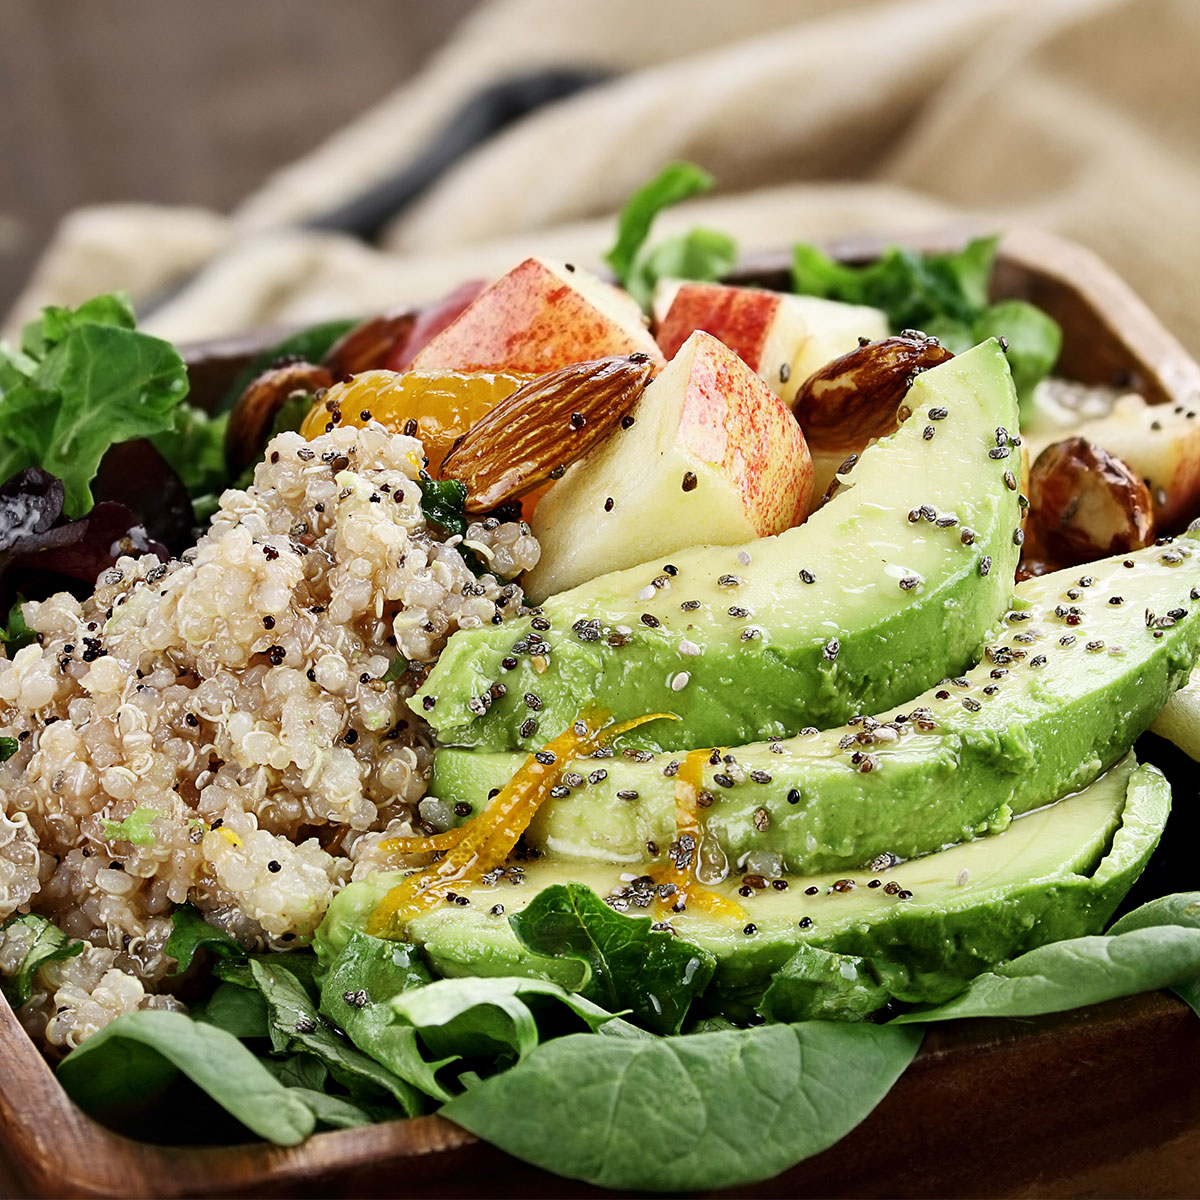 healthy salad with apples, avocado, quinoa, and chia seeds